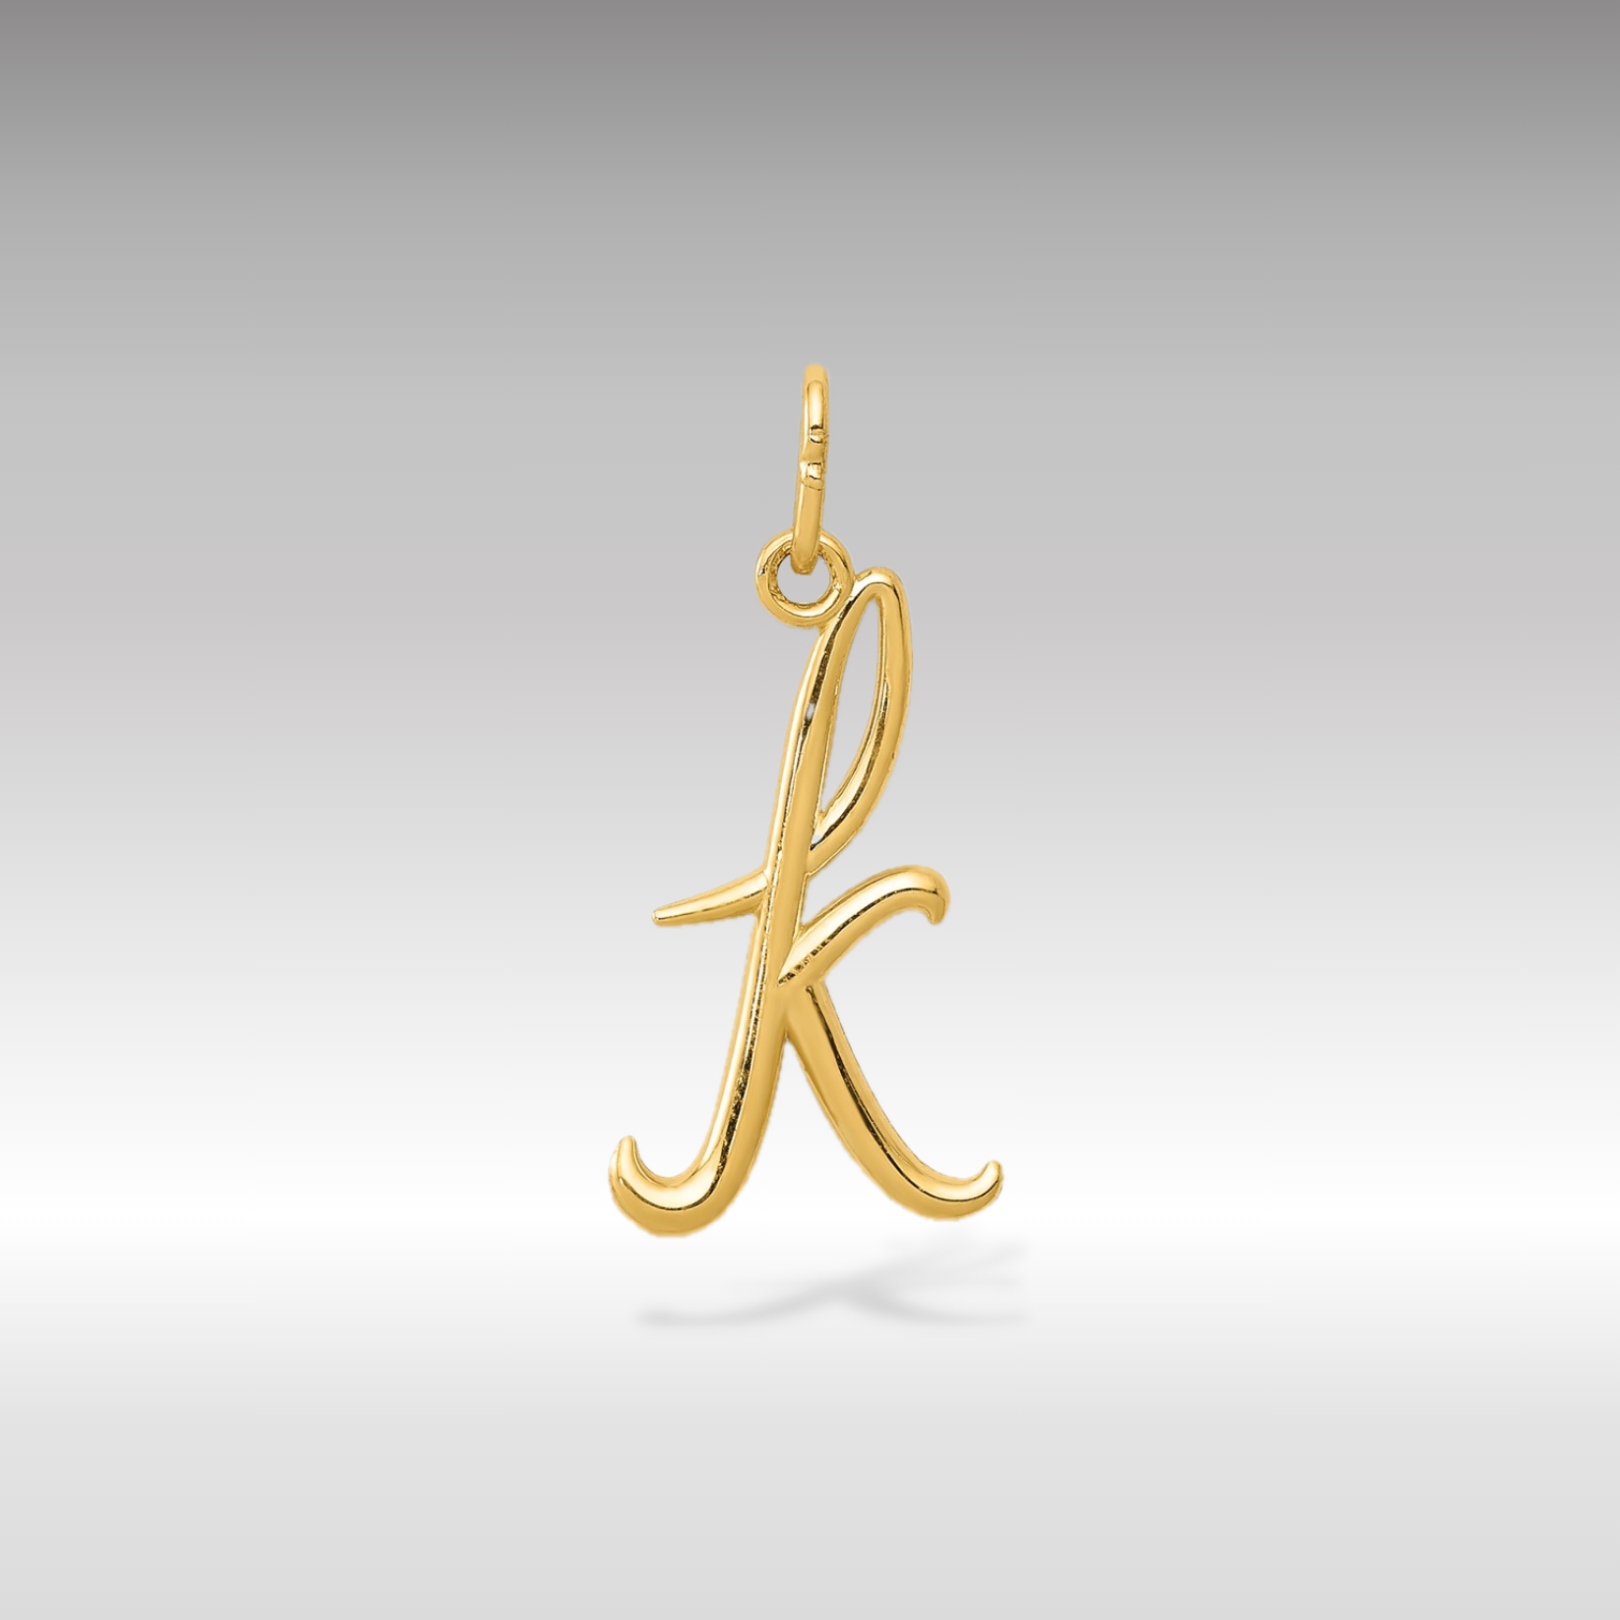 14K Gold Lowercase Initial "k" Pendant - Charlie & Co. Jewelry